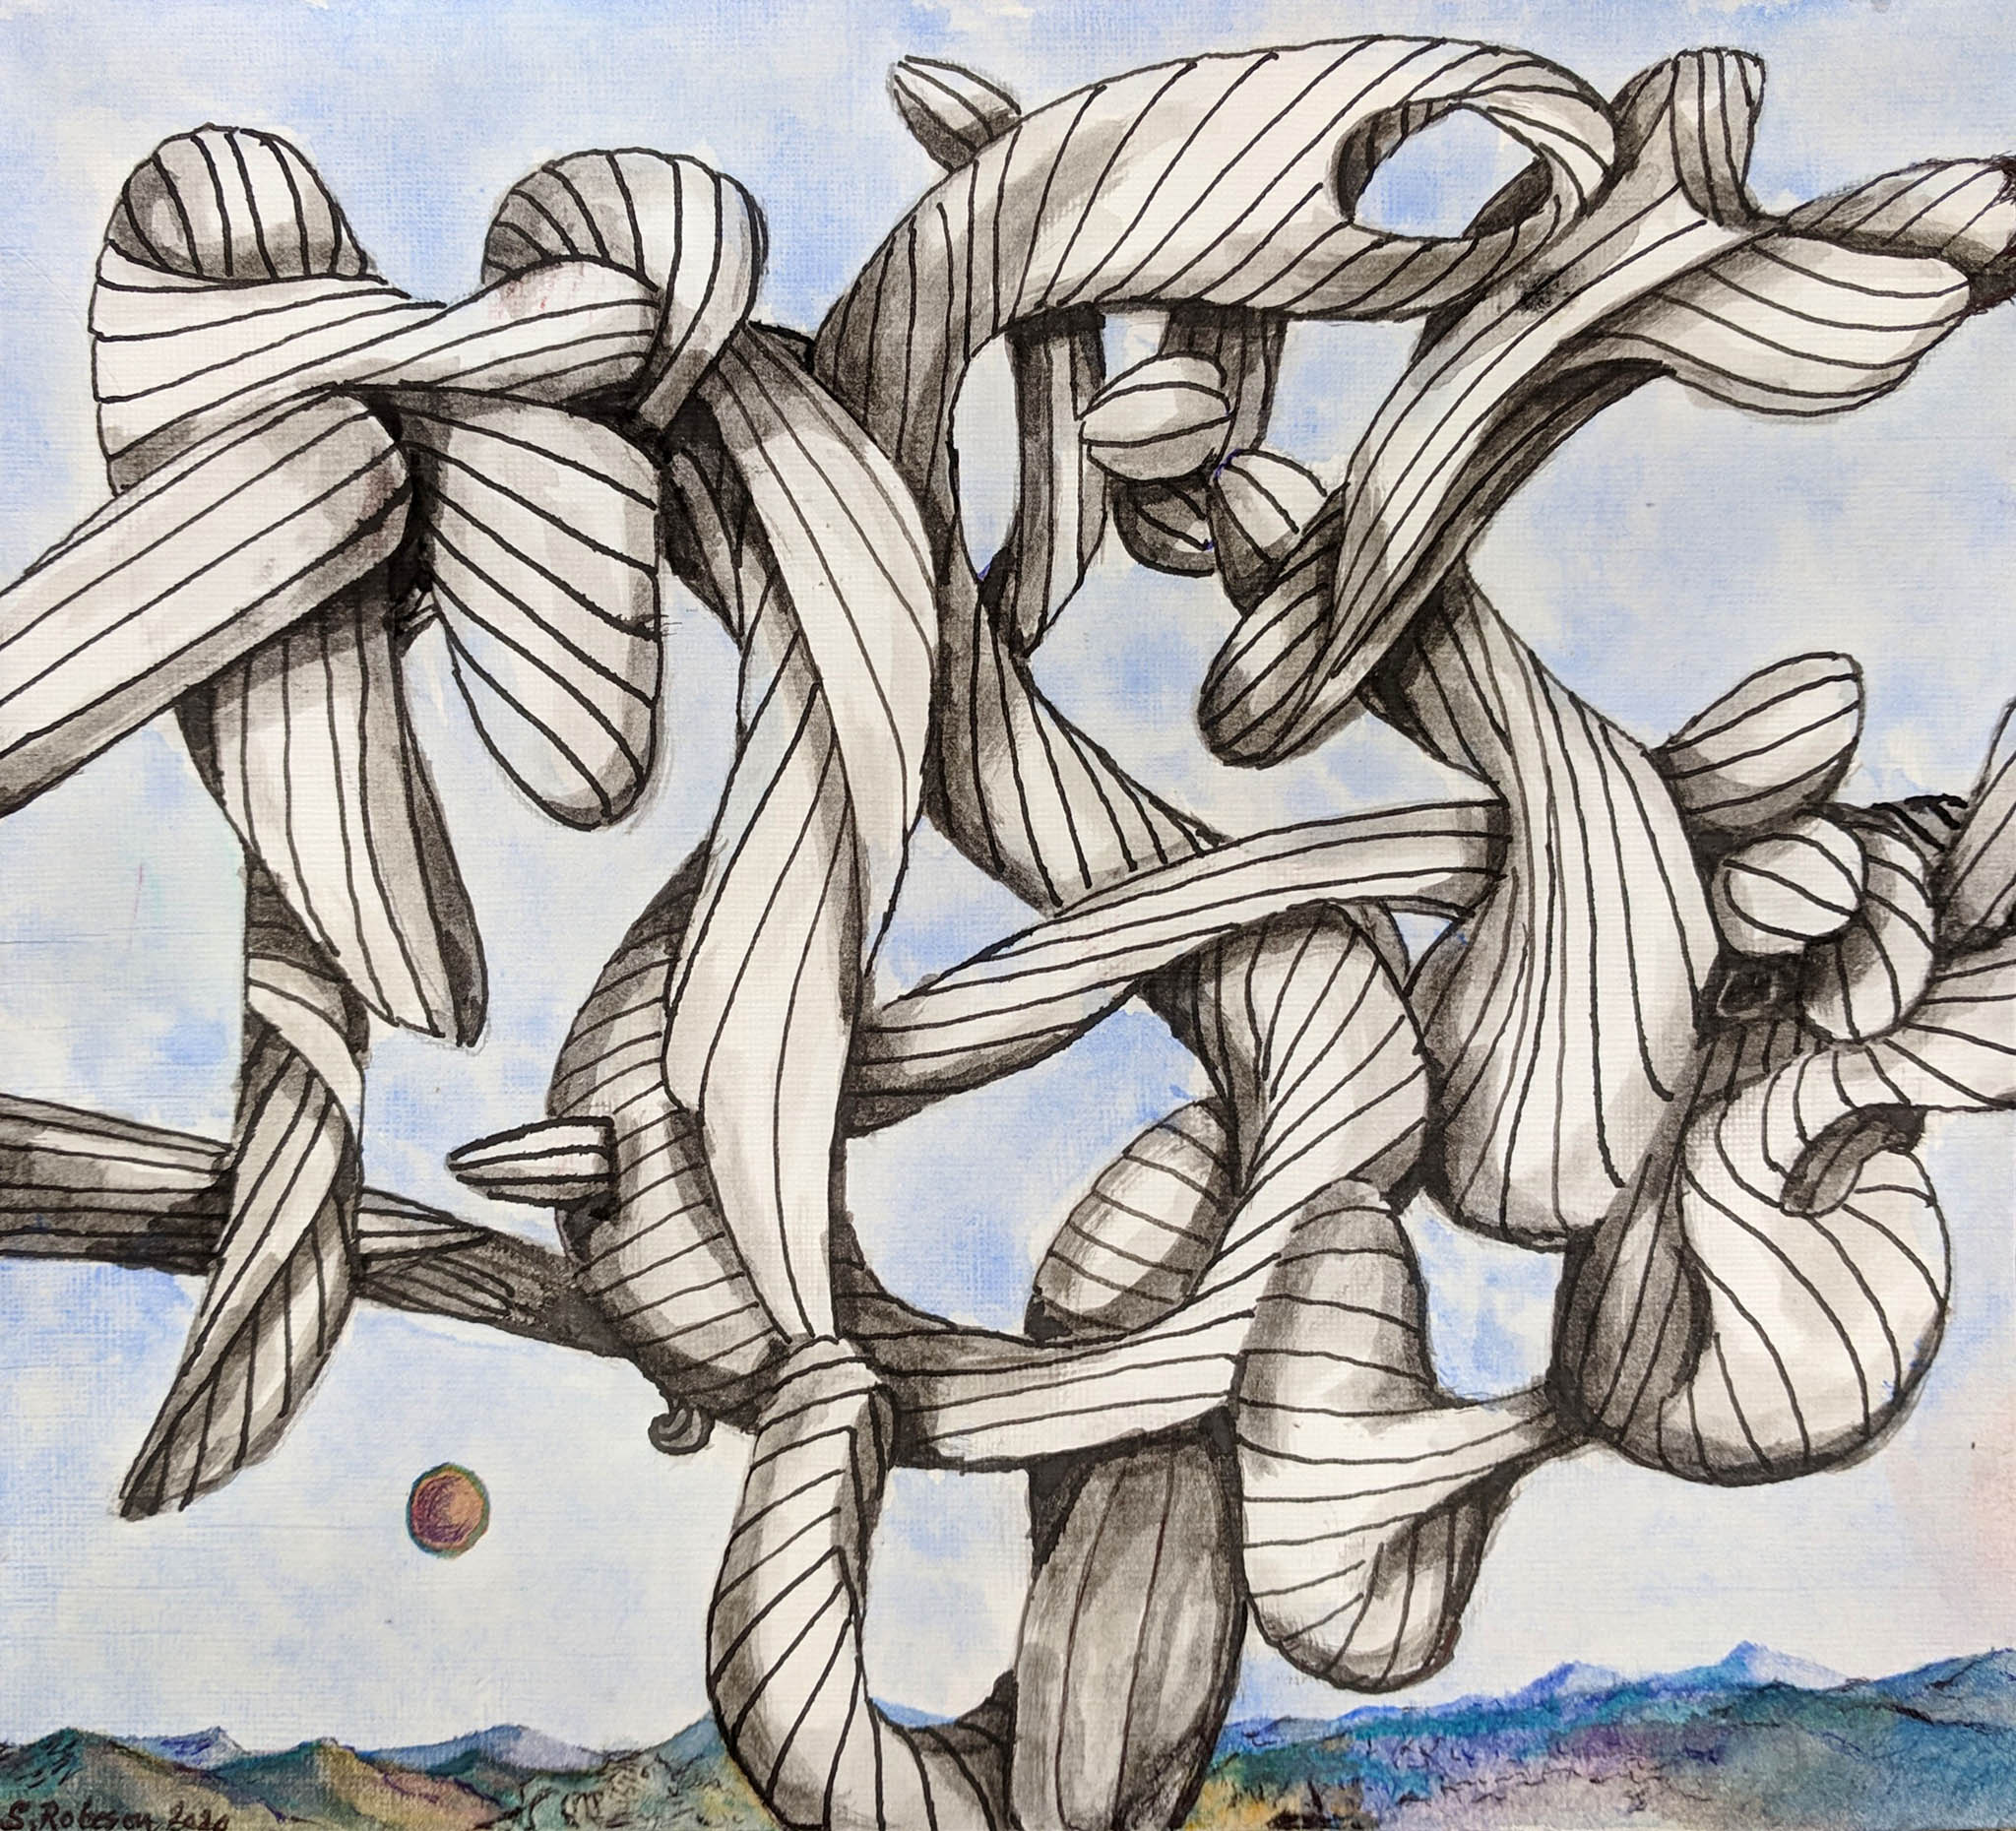 Stephen Robeson Miller - From the Other Side - 2020 ink, wash, gouache, watercolor, and graphite on paper